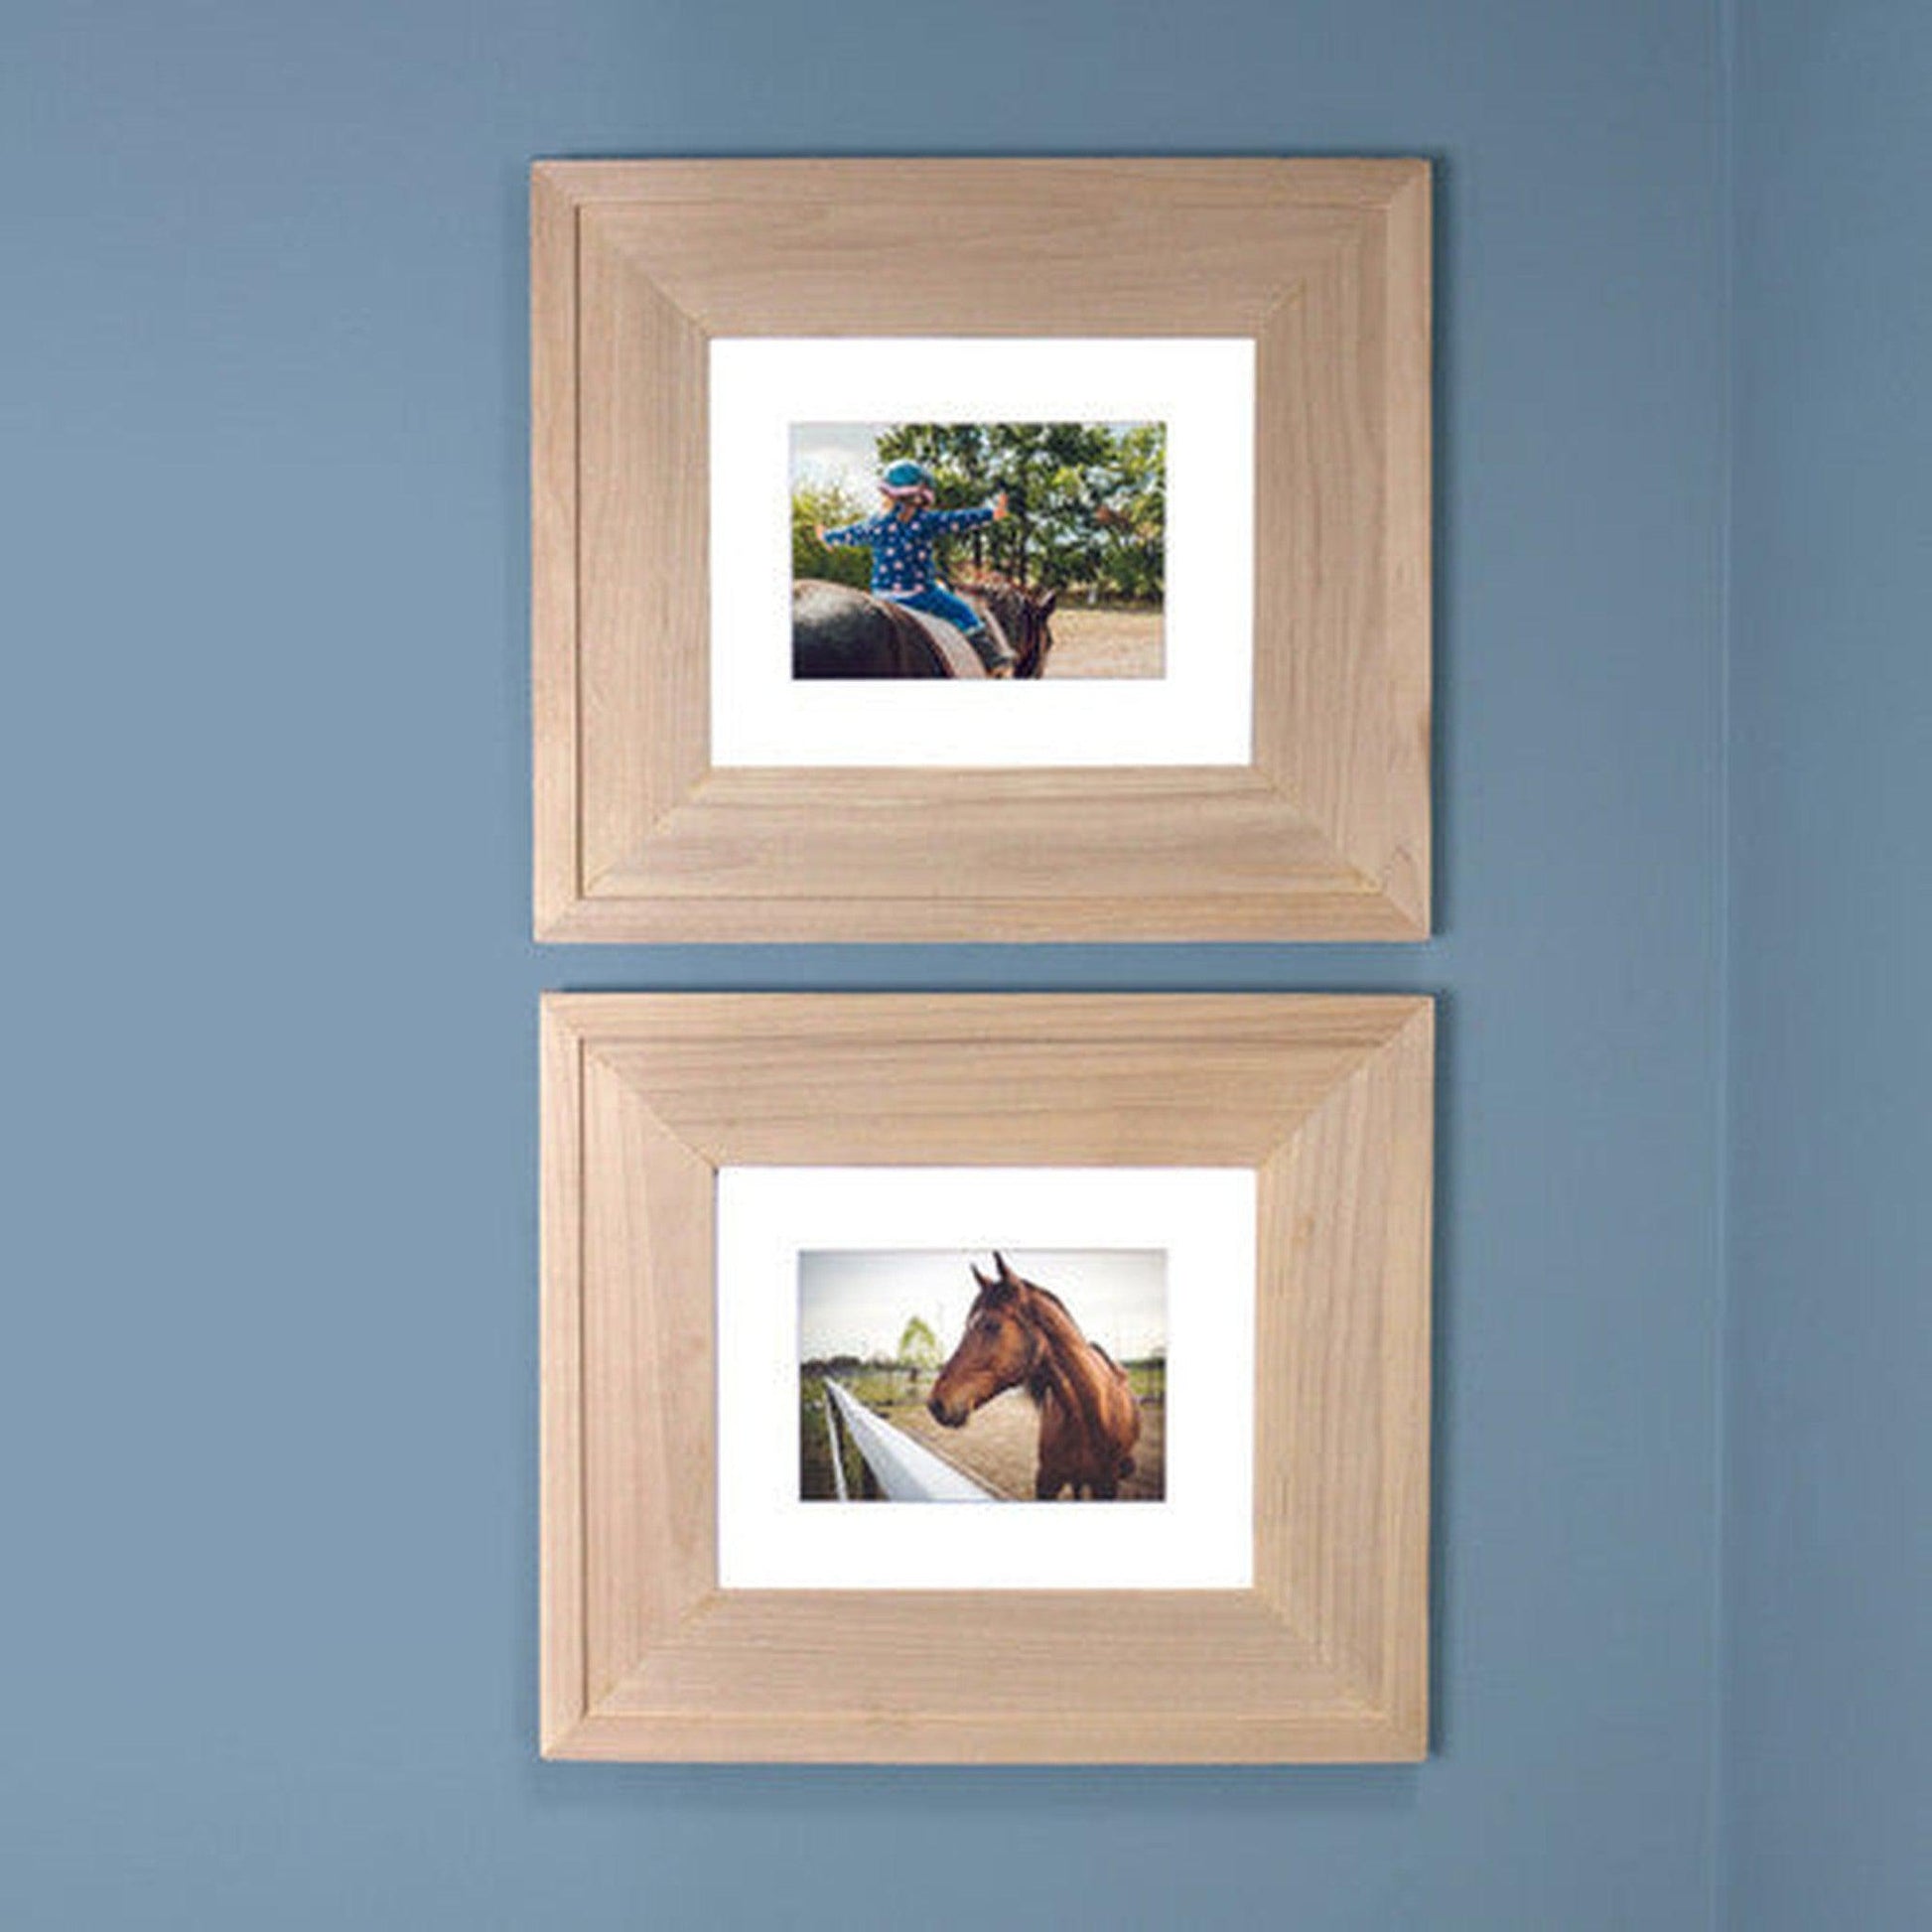 Fox Hollow Furnishings 14" x 11" Unfinished Raised Edge Compact Landscape Standard 4" Depth Recessed Picture Frame Medicine Cabinet